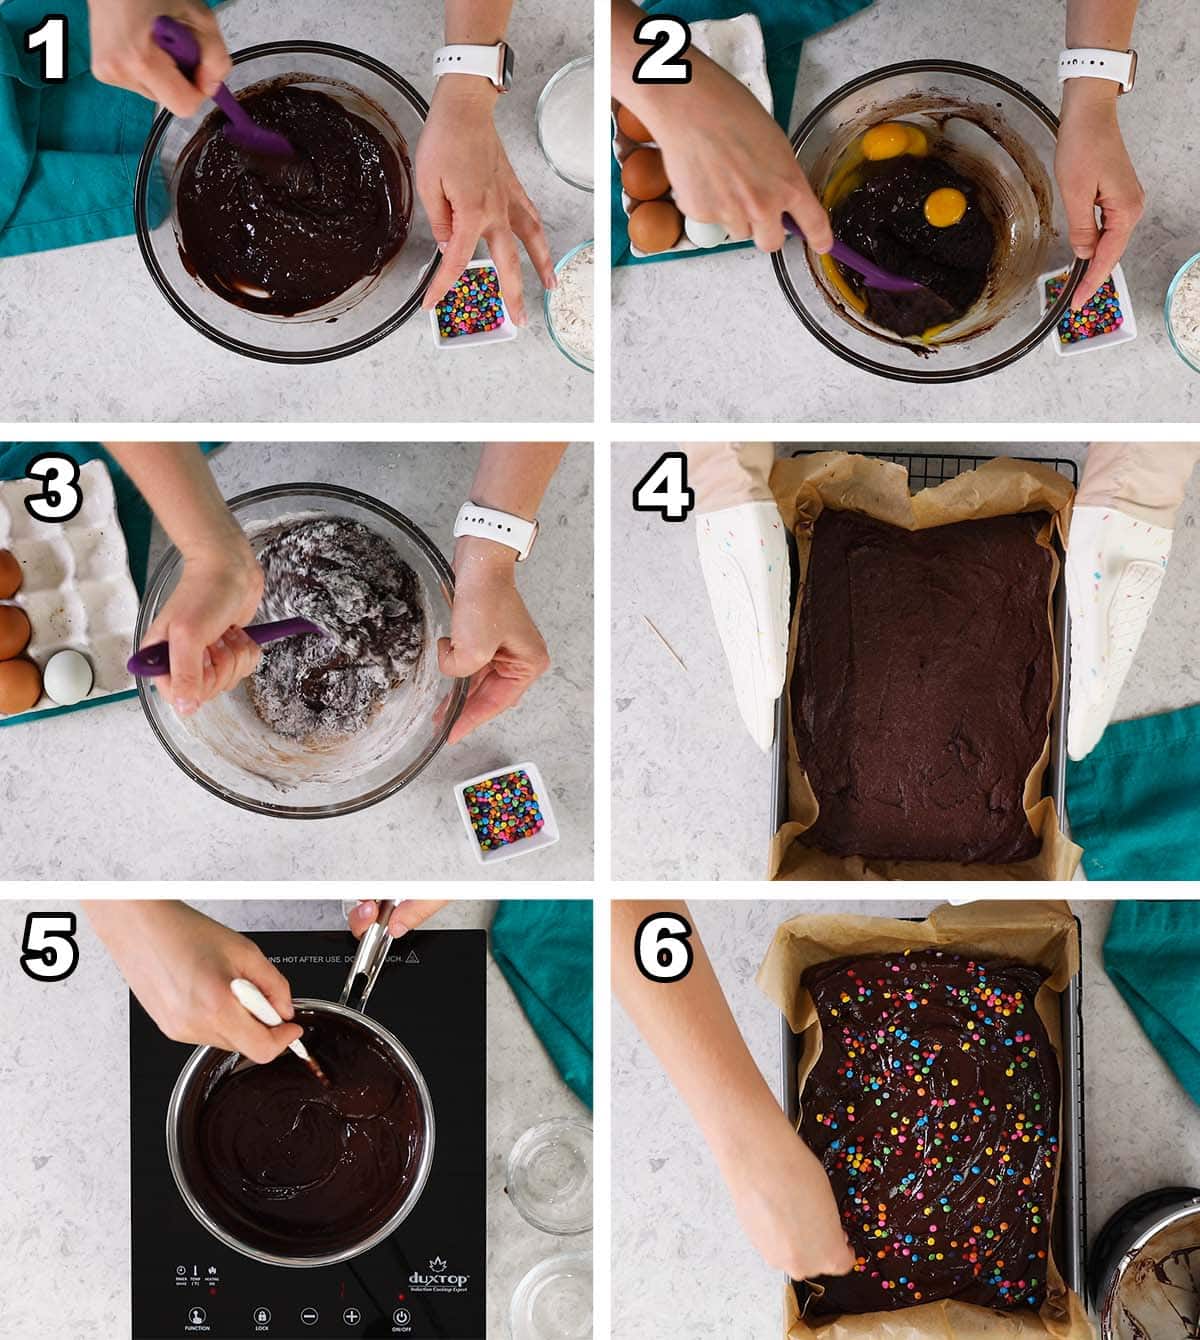 Collage showing the 6 steps to making cosmic brownies